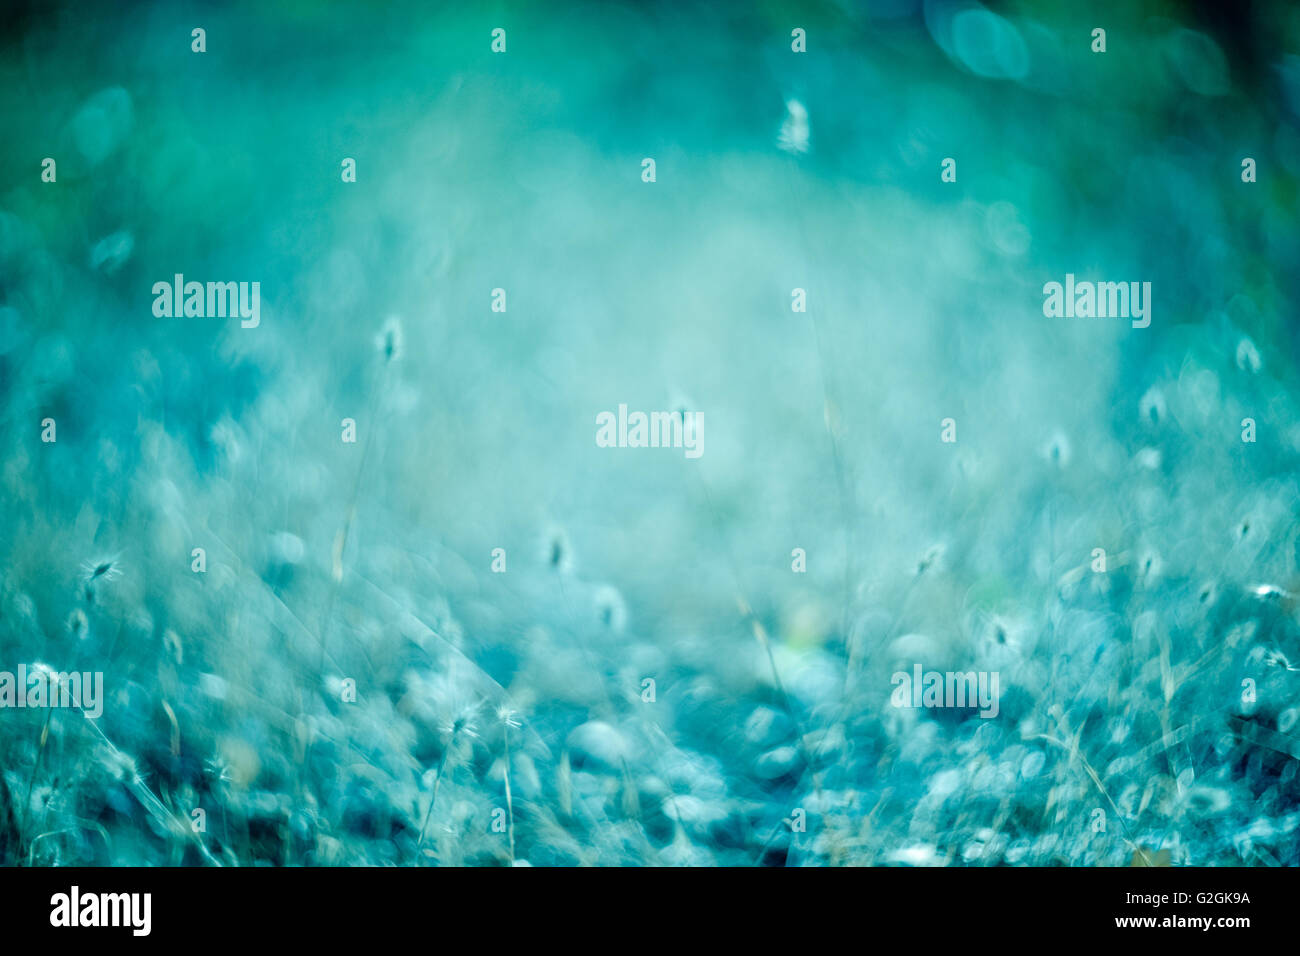 Grass with Blue Tint and Swirling Bokeh Stock Photo